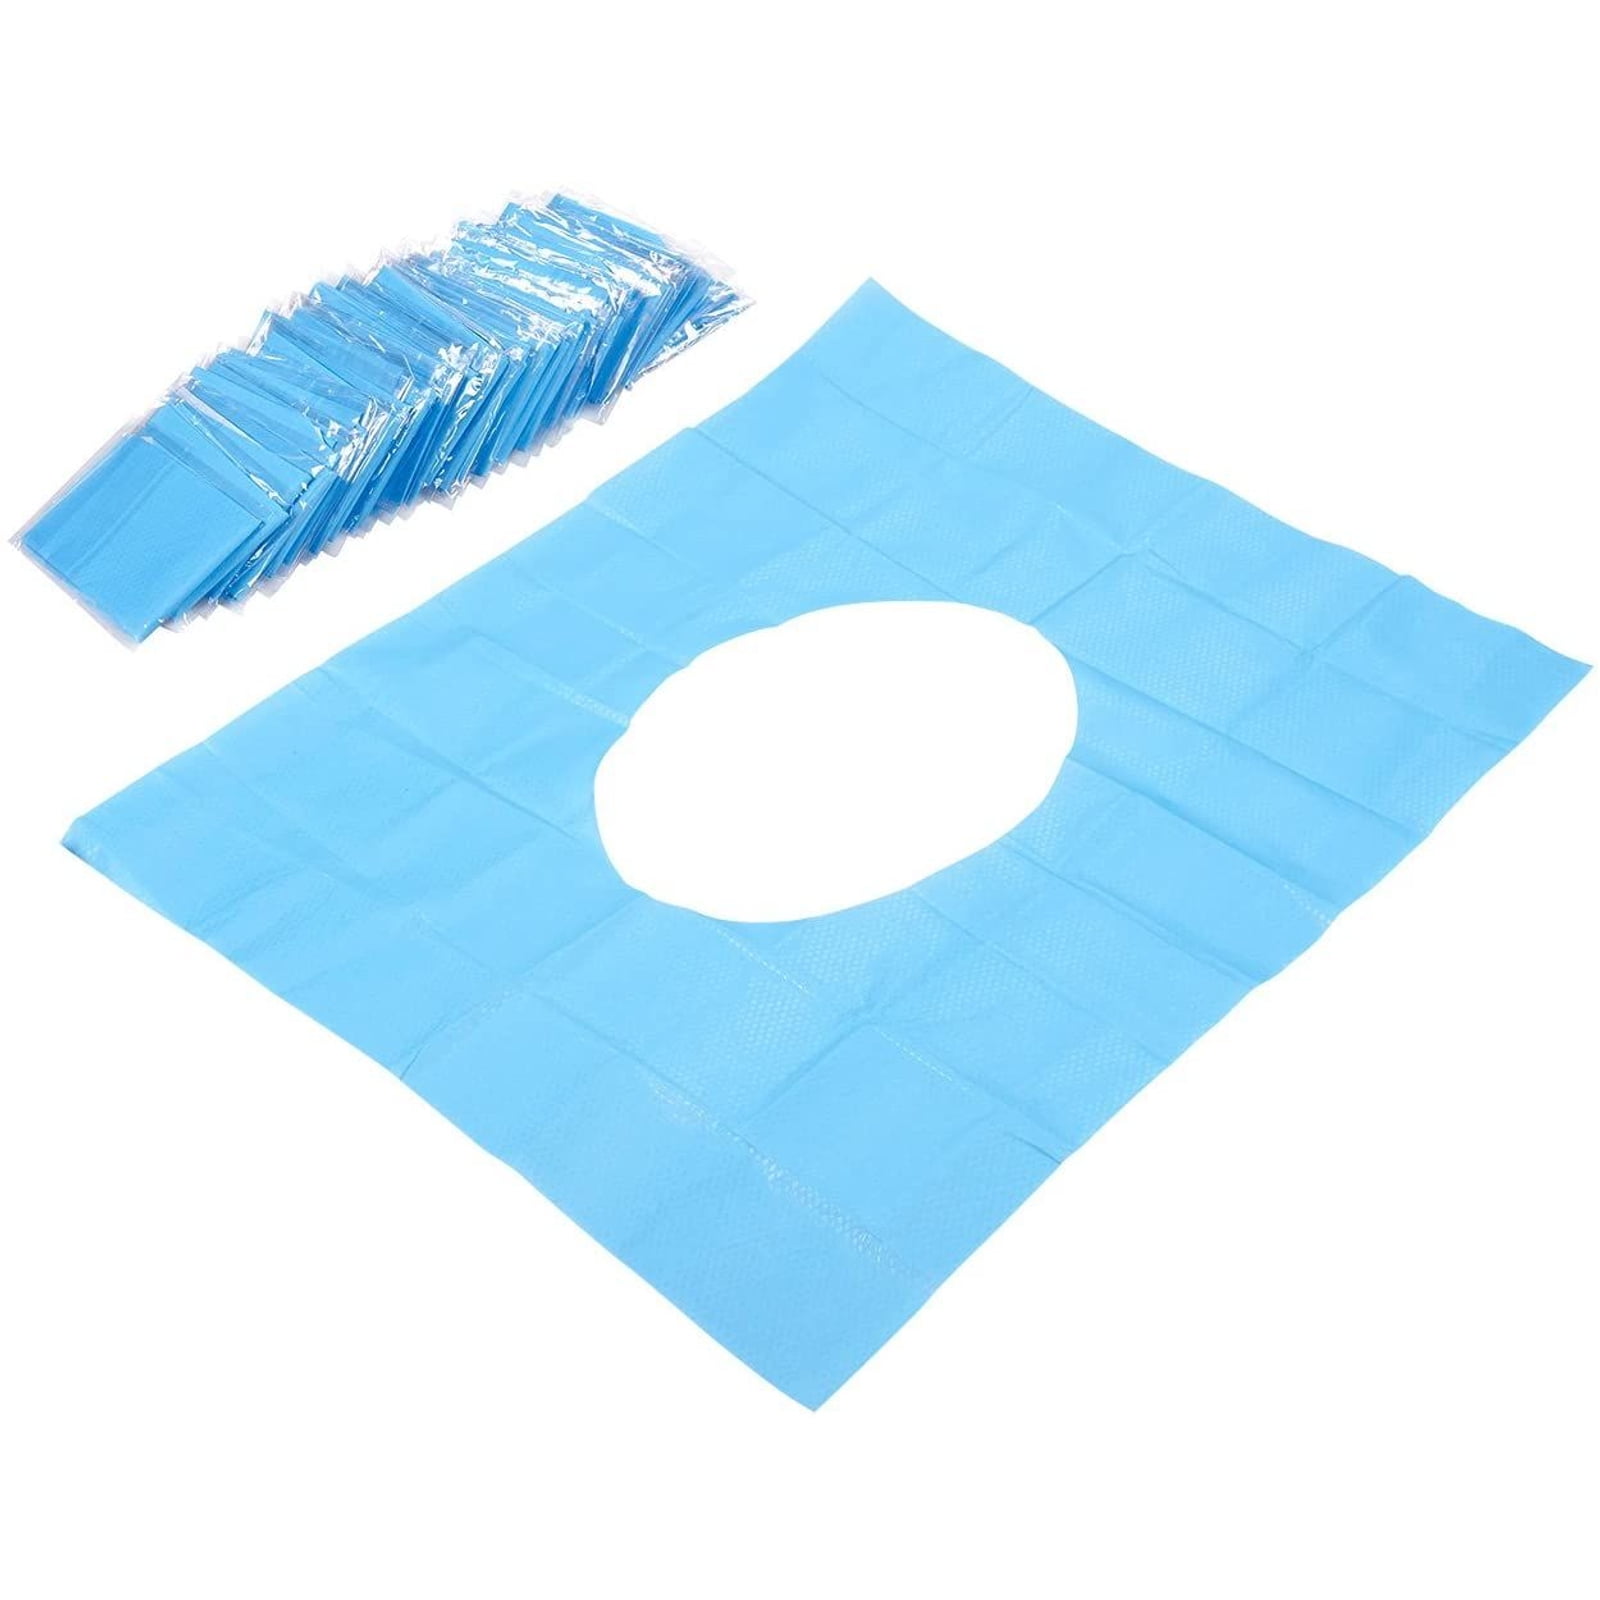 10pcs Disposable Waterproof Paper Toilet Seat Cover Sanitary Travel For C E0V3 